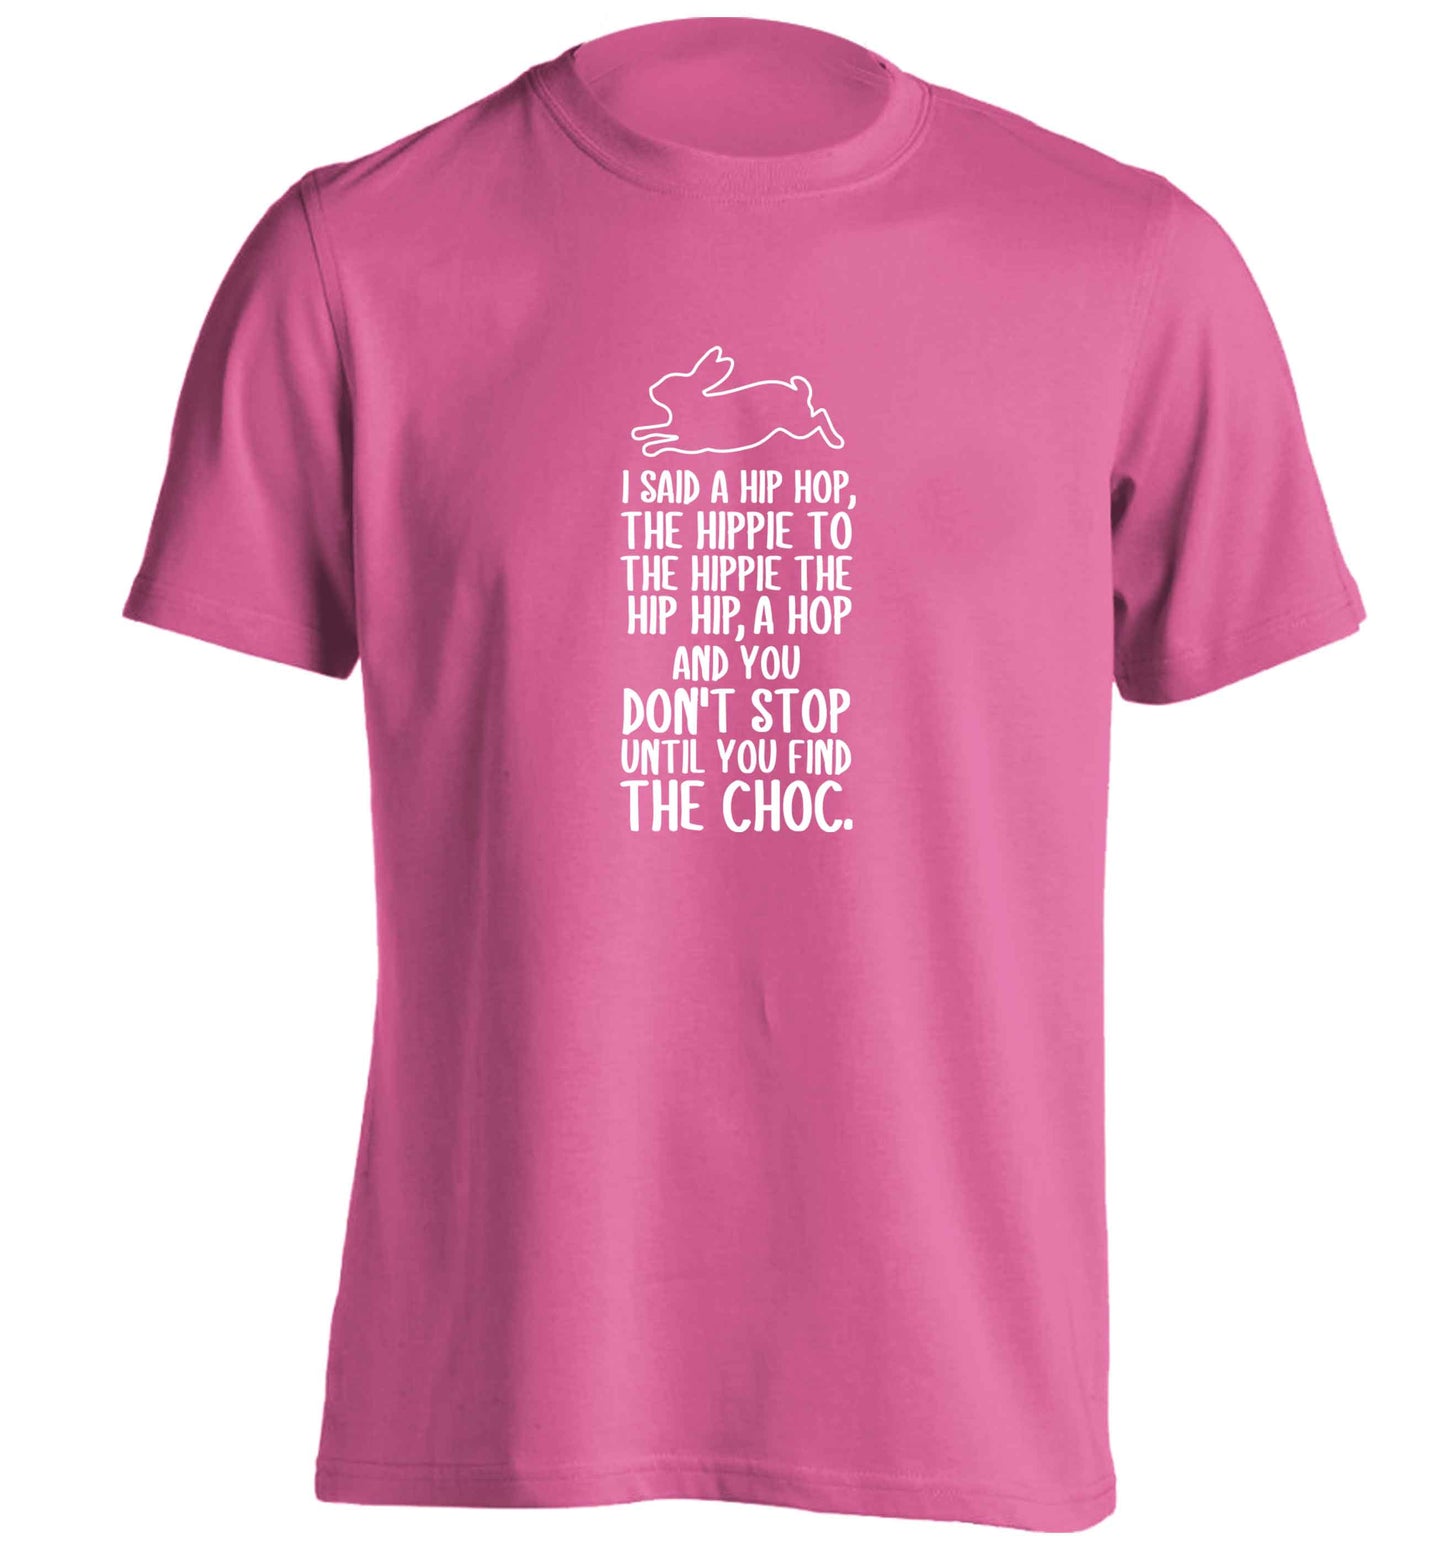 Don't stop until you find the choc adults unisex pink Tshirt 2XL